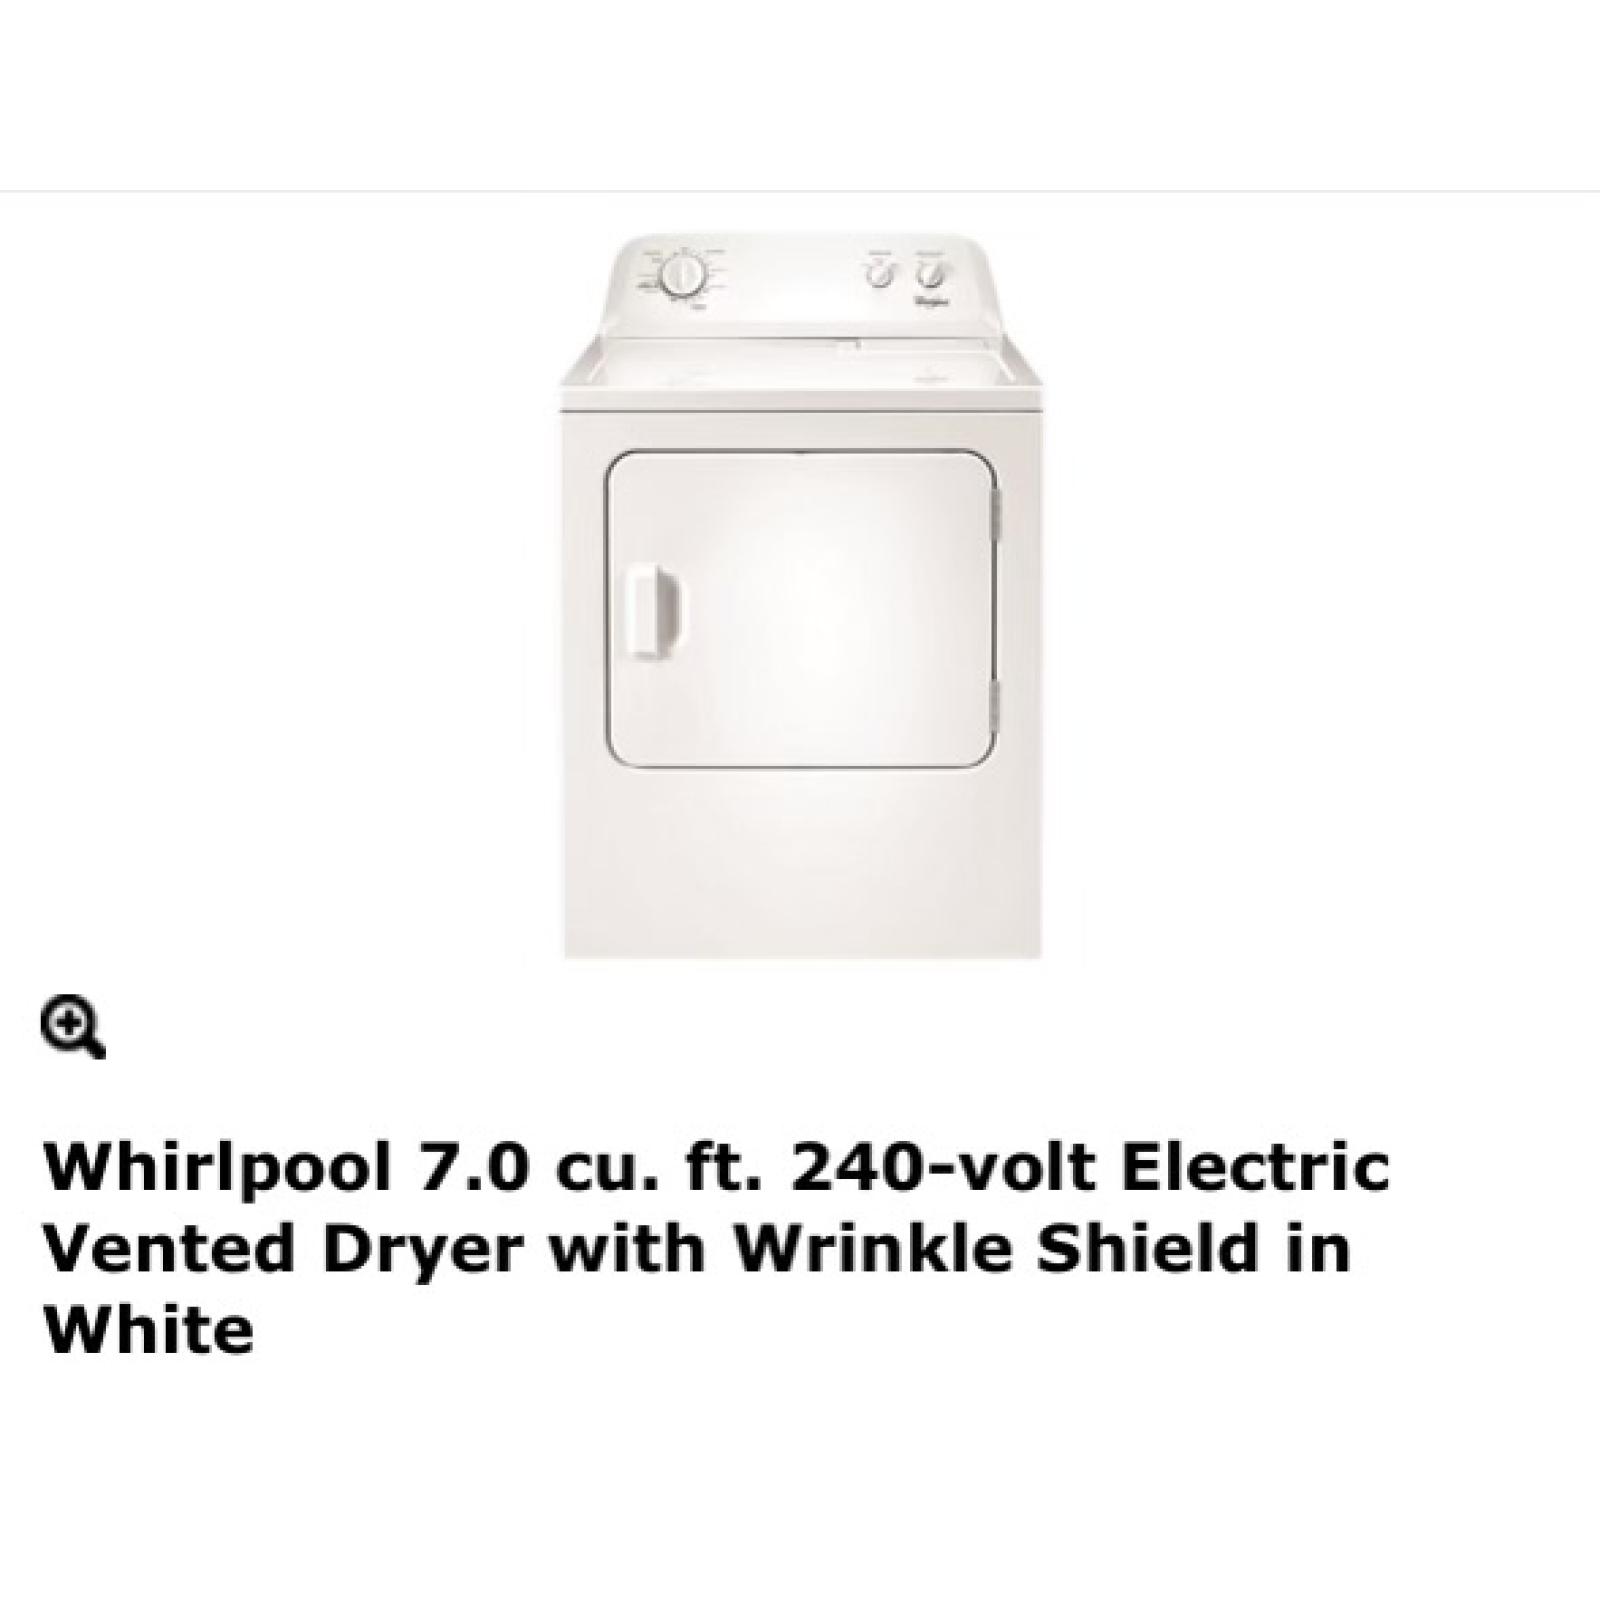 DALLAS LOCATION NEW! - WHIRLPOOL WASHER AND DRYER SET